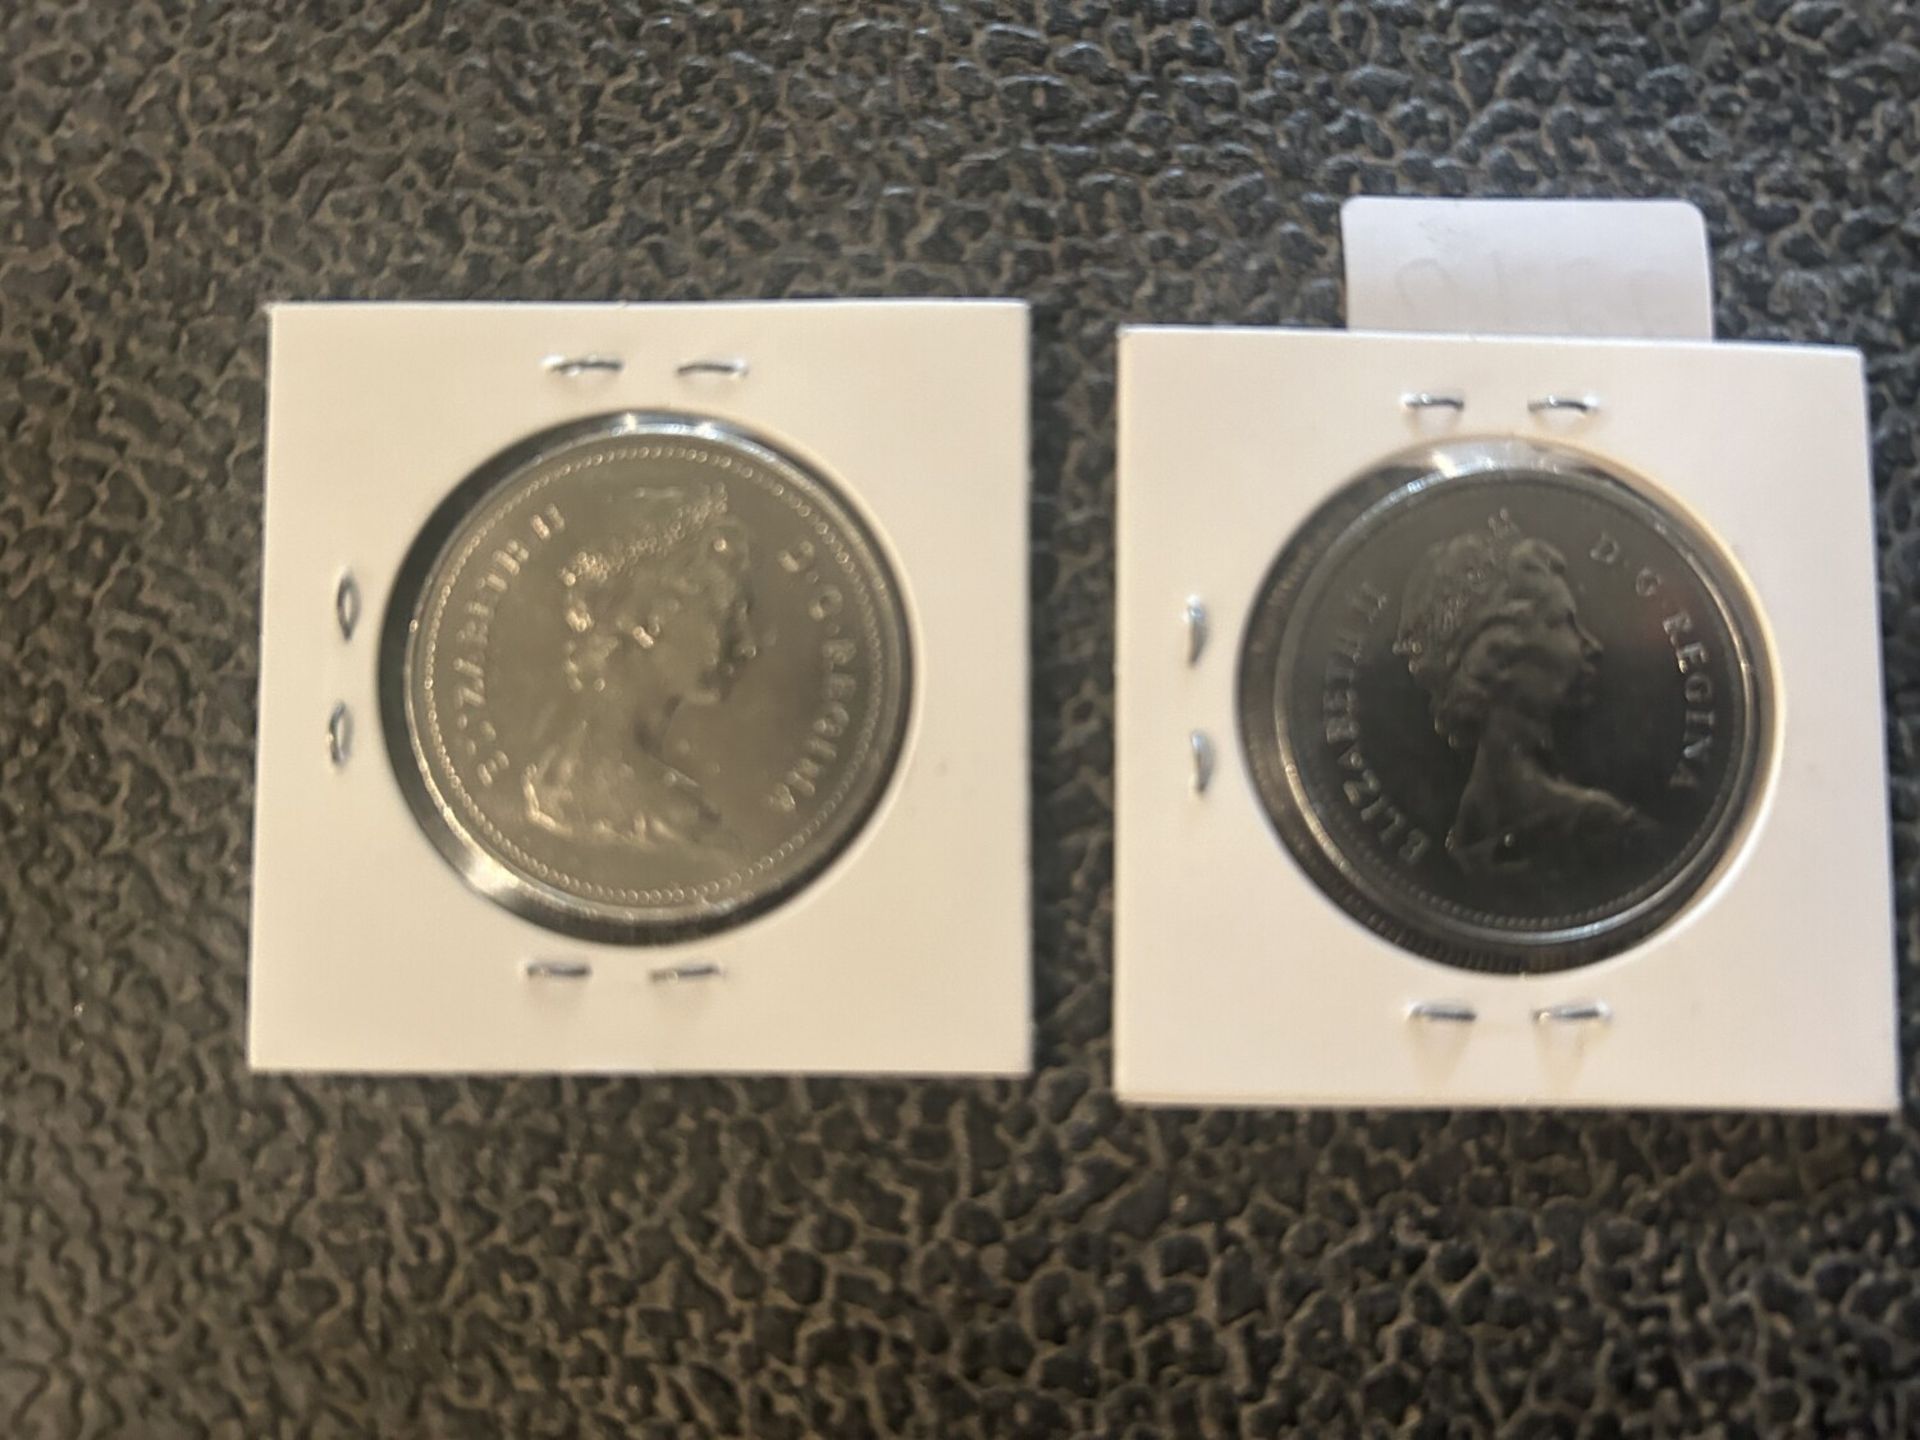 1979 & 1976 CANADIAN DOLLARS - Image 2 of 2